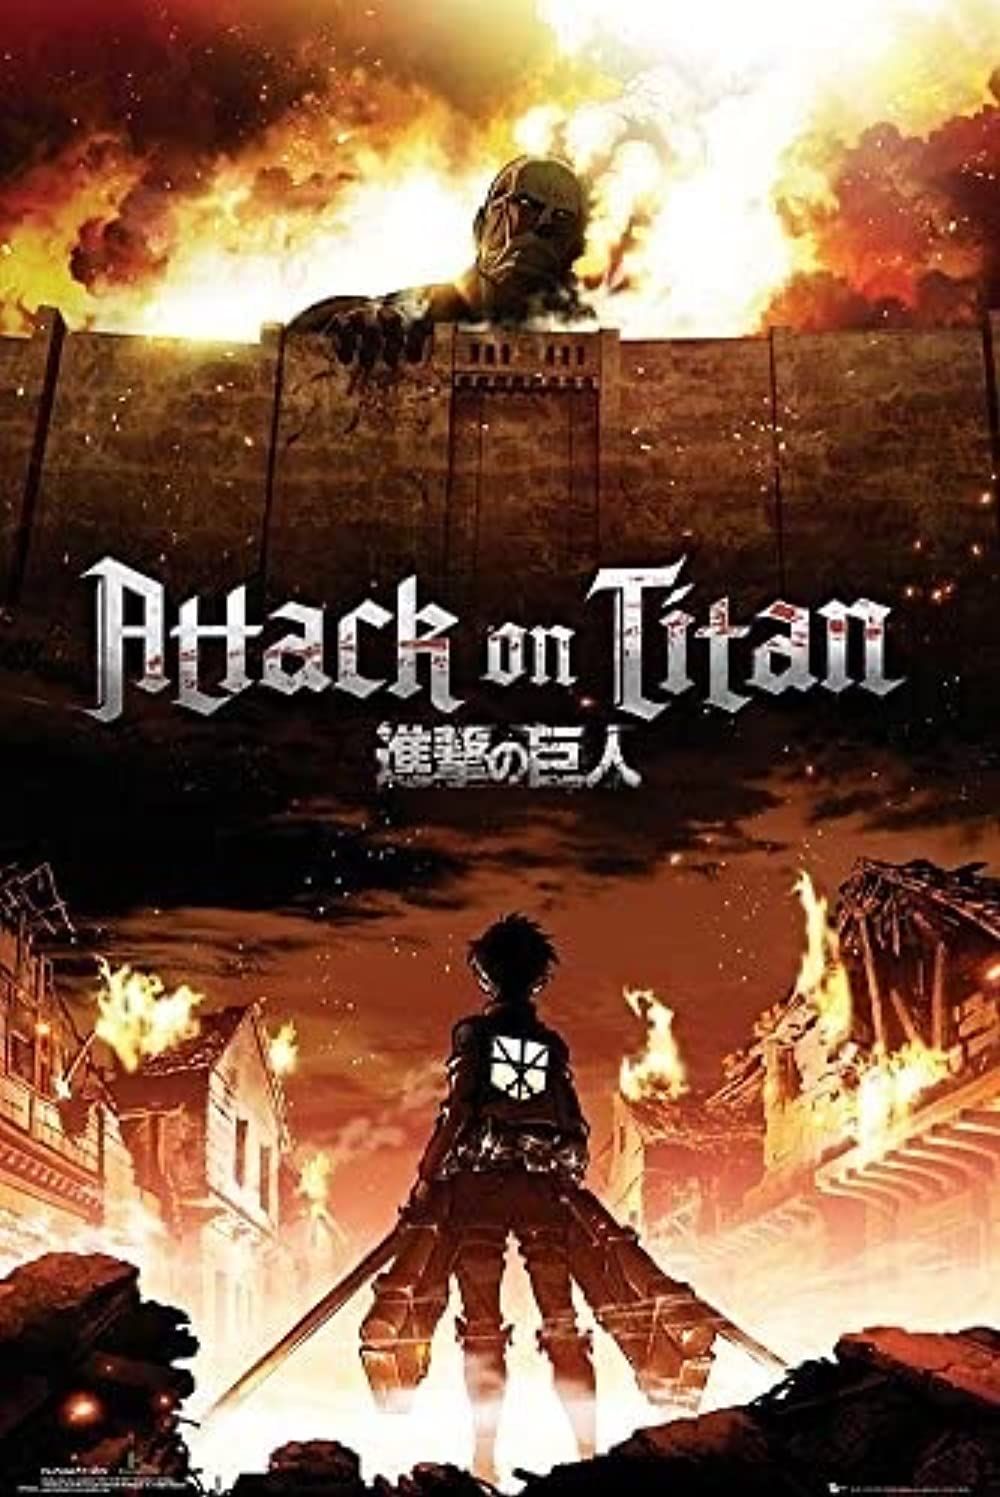 Attack on Titan Final Season Part 3 Release Date and Time, Trailer